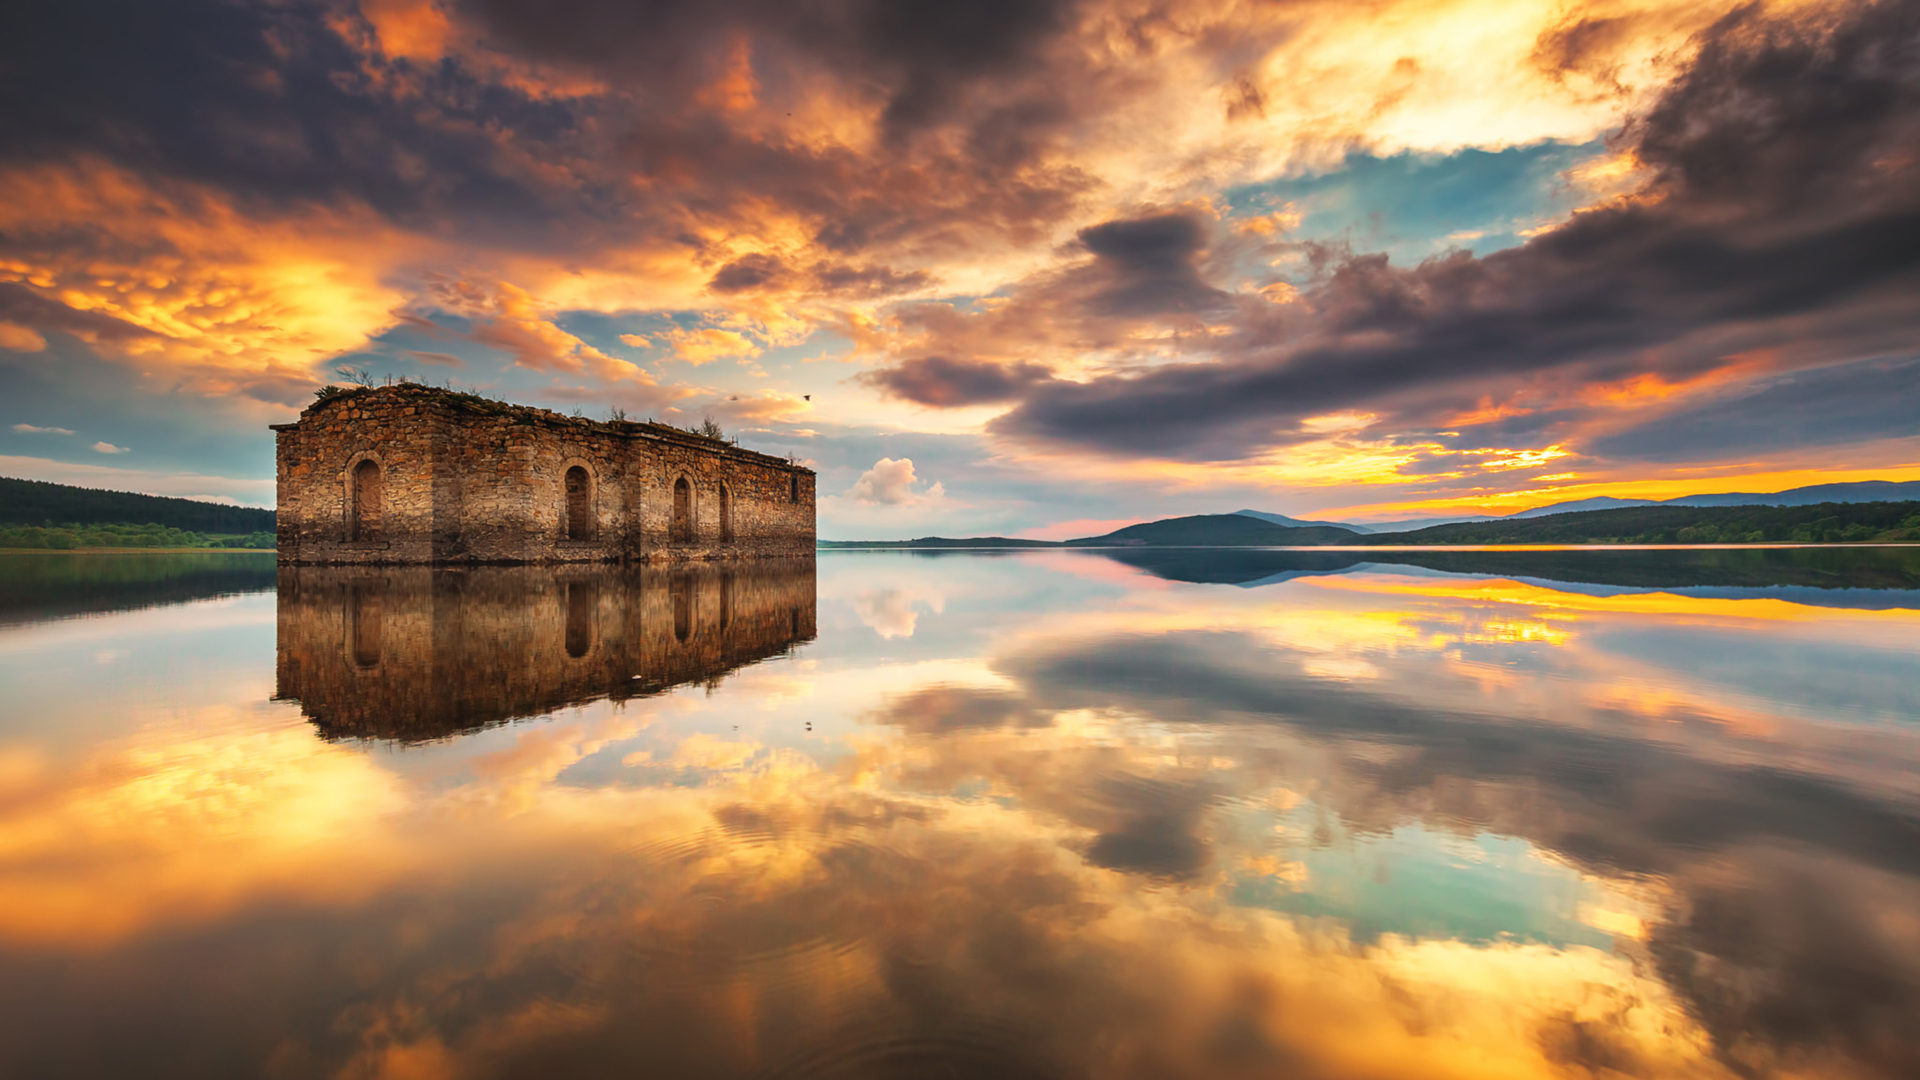 Dam jebrechevo in bulgaria sunset sky red clouds abandoned church reflection in water hd desktop wallpapers for puters laptop tablet and mobile phones